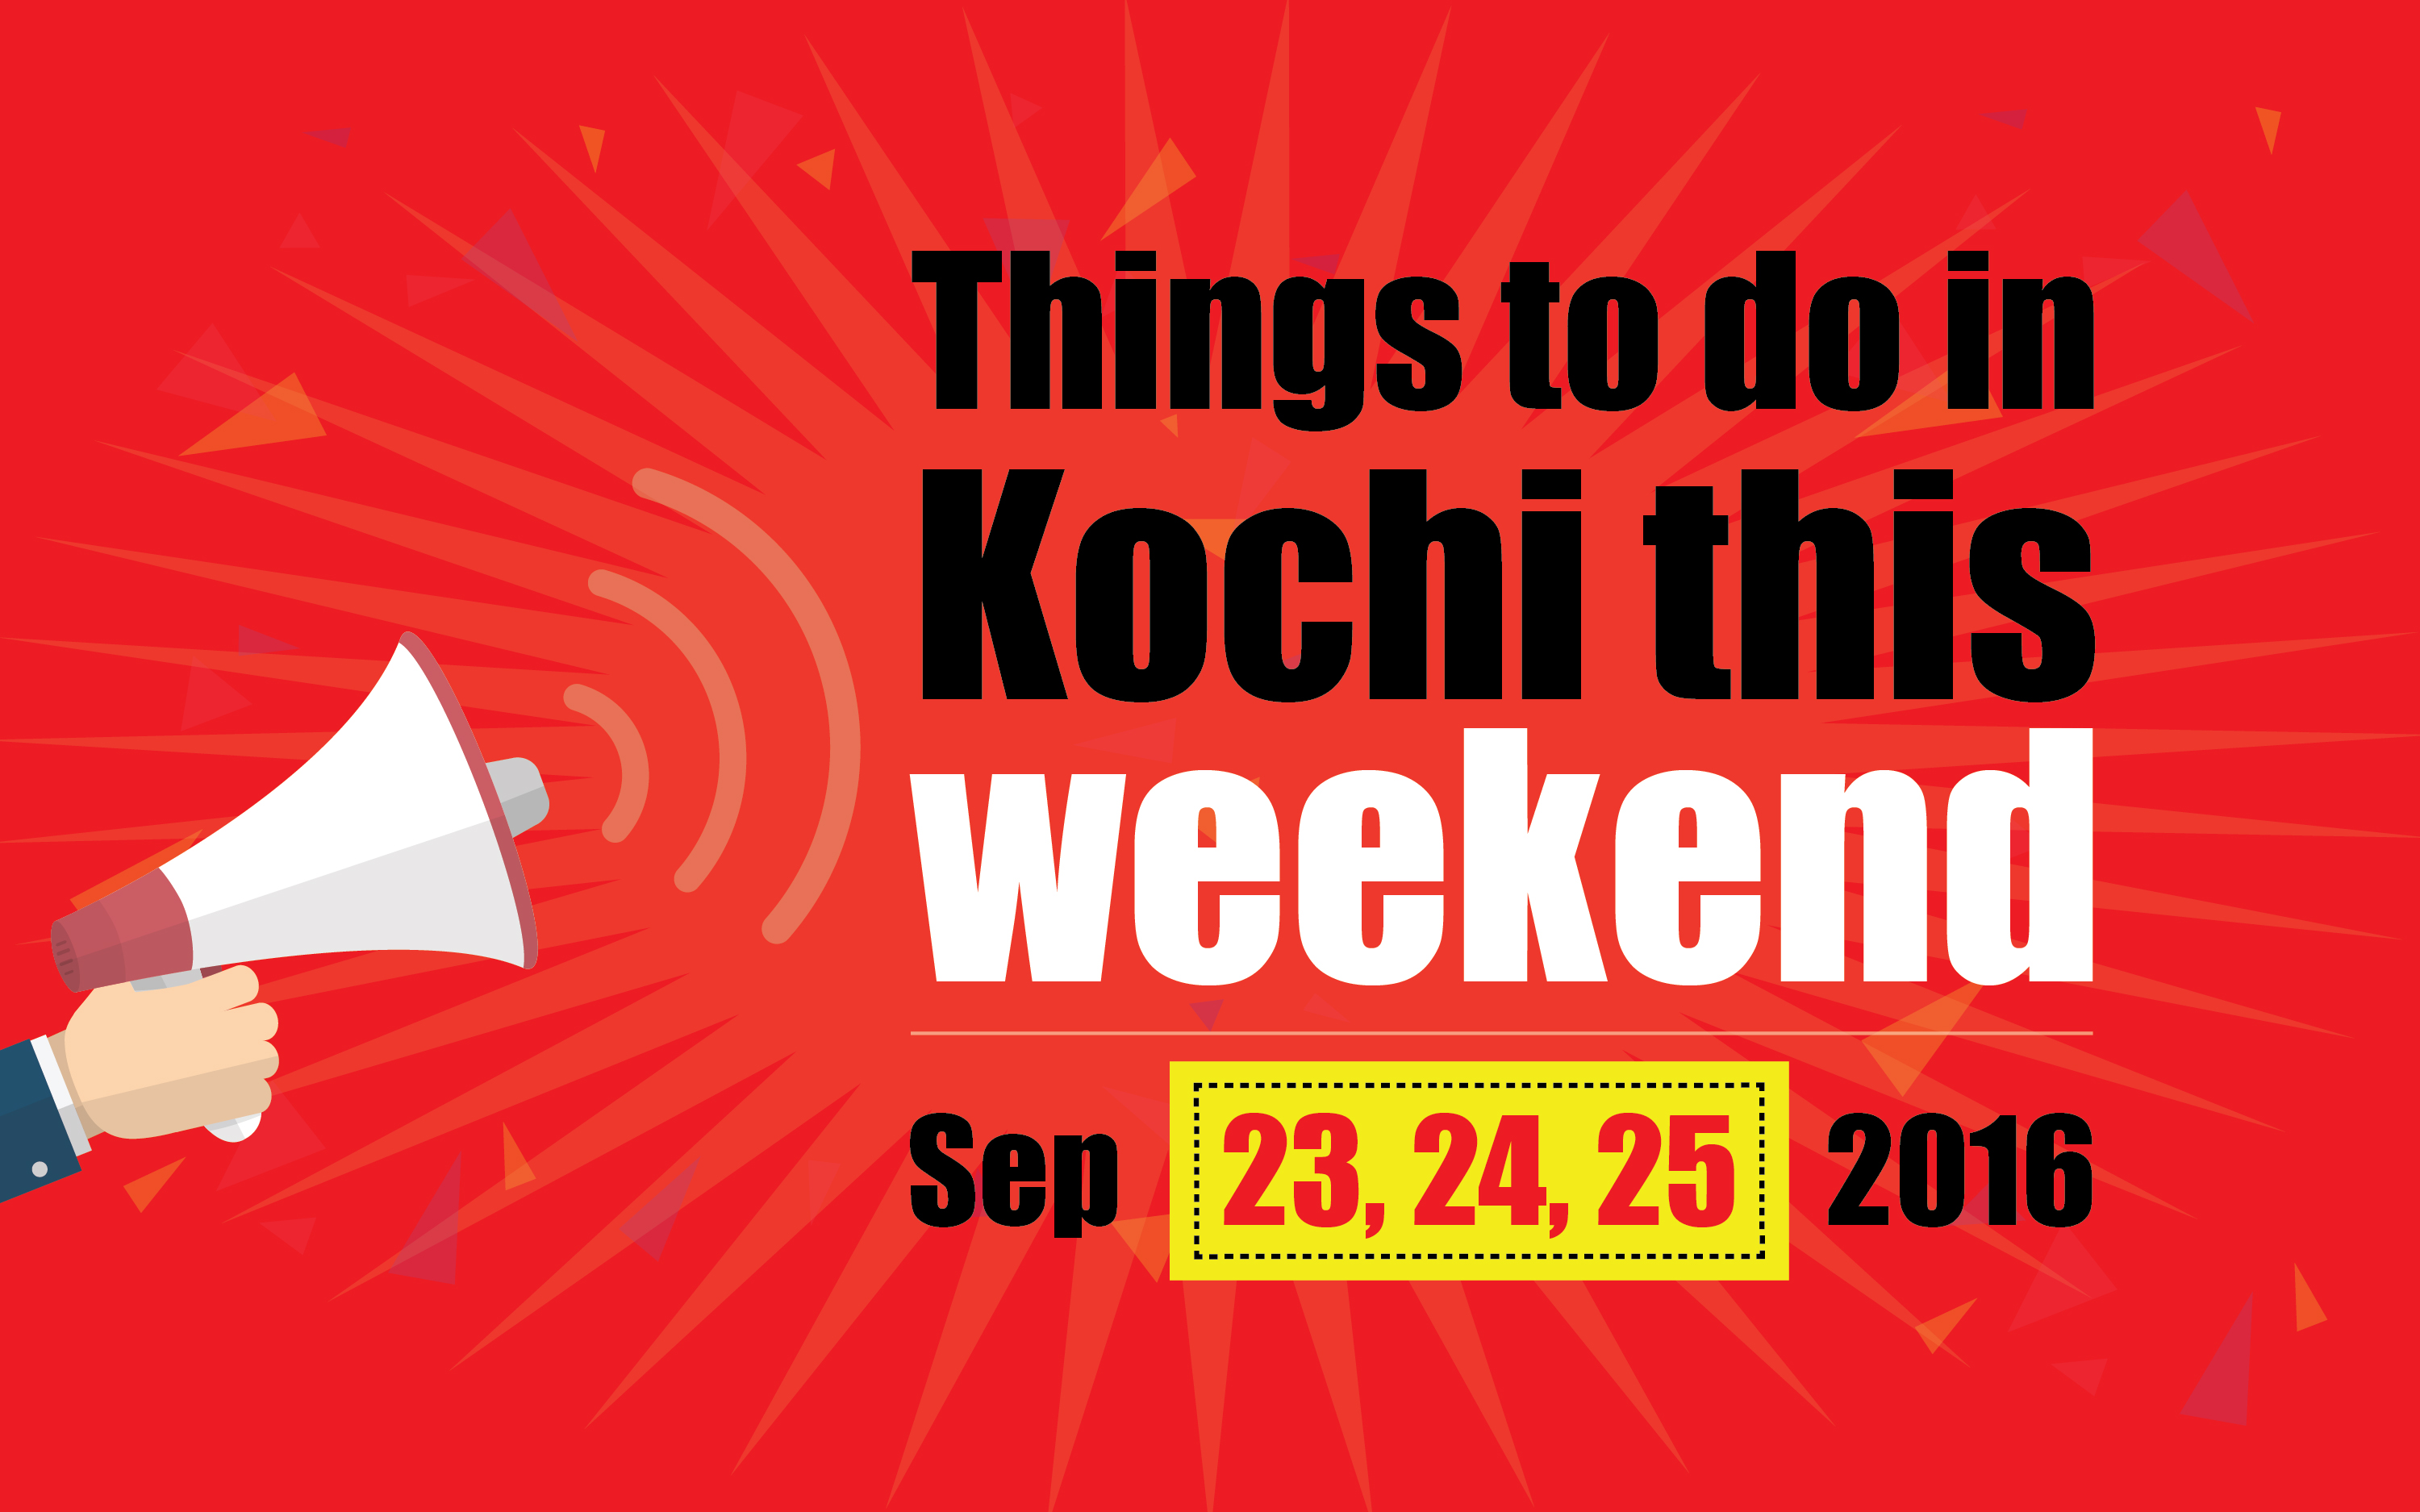 The Go-To Guide For a Great Weekend in Kochi